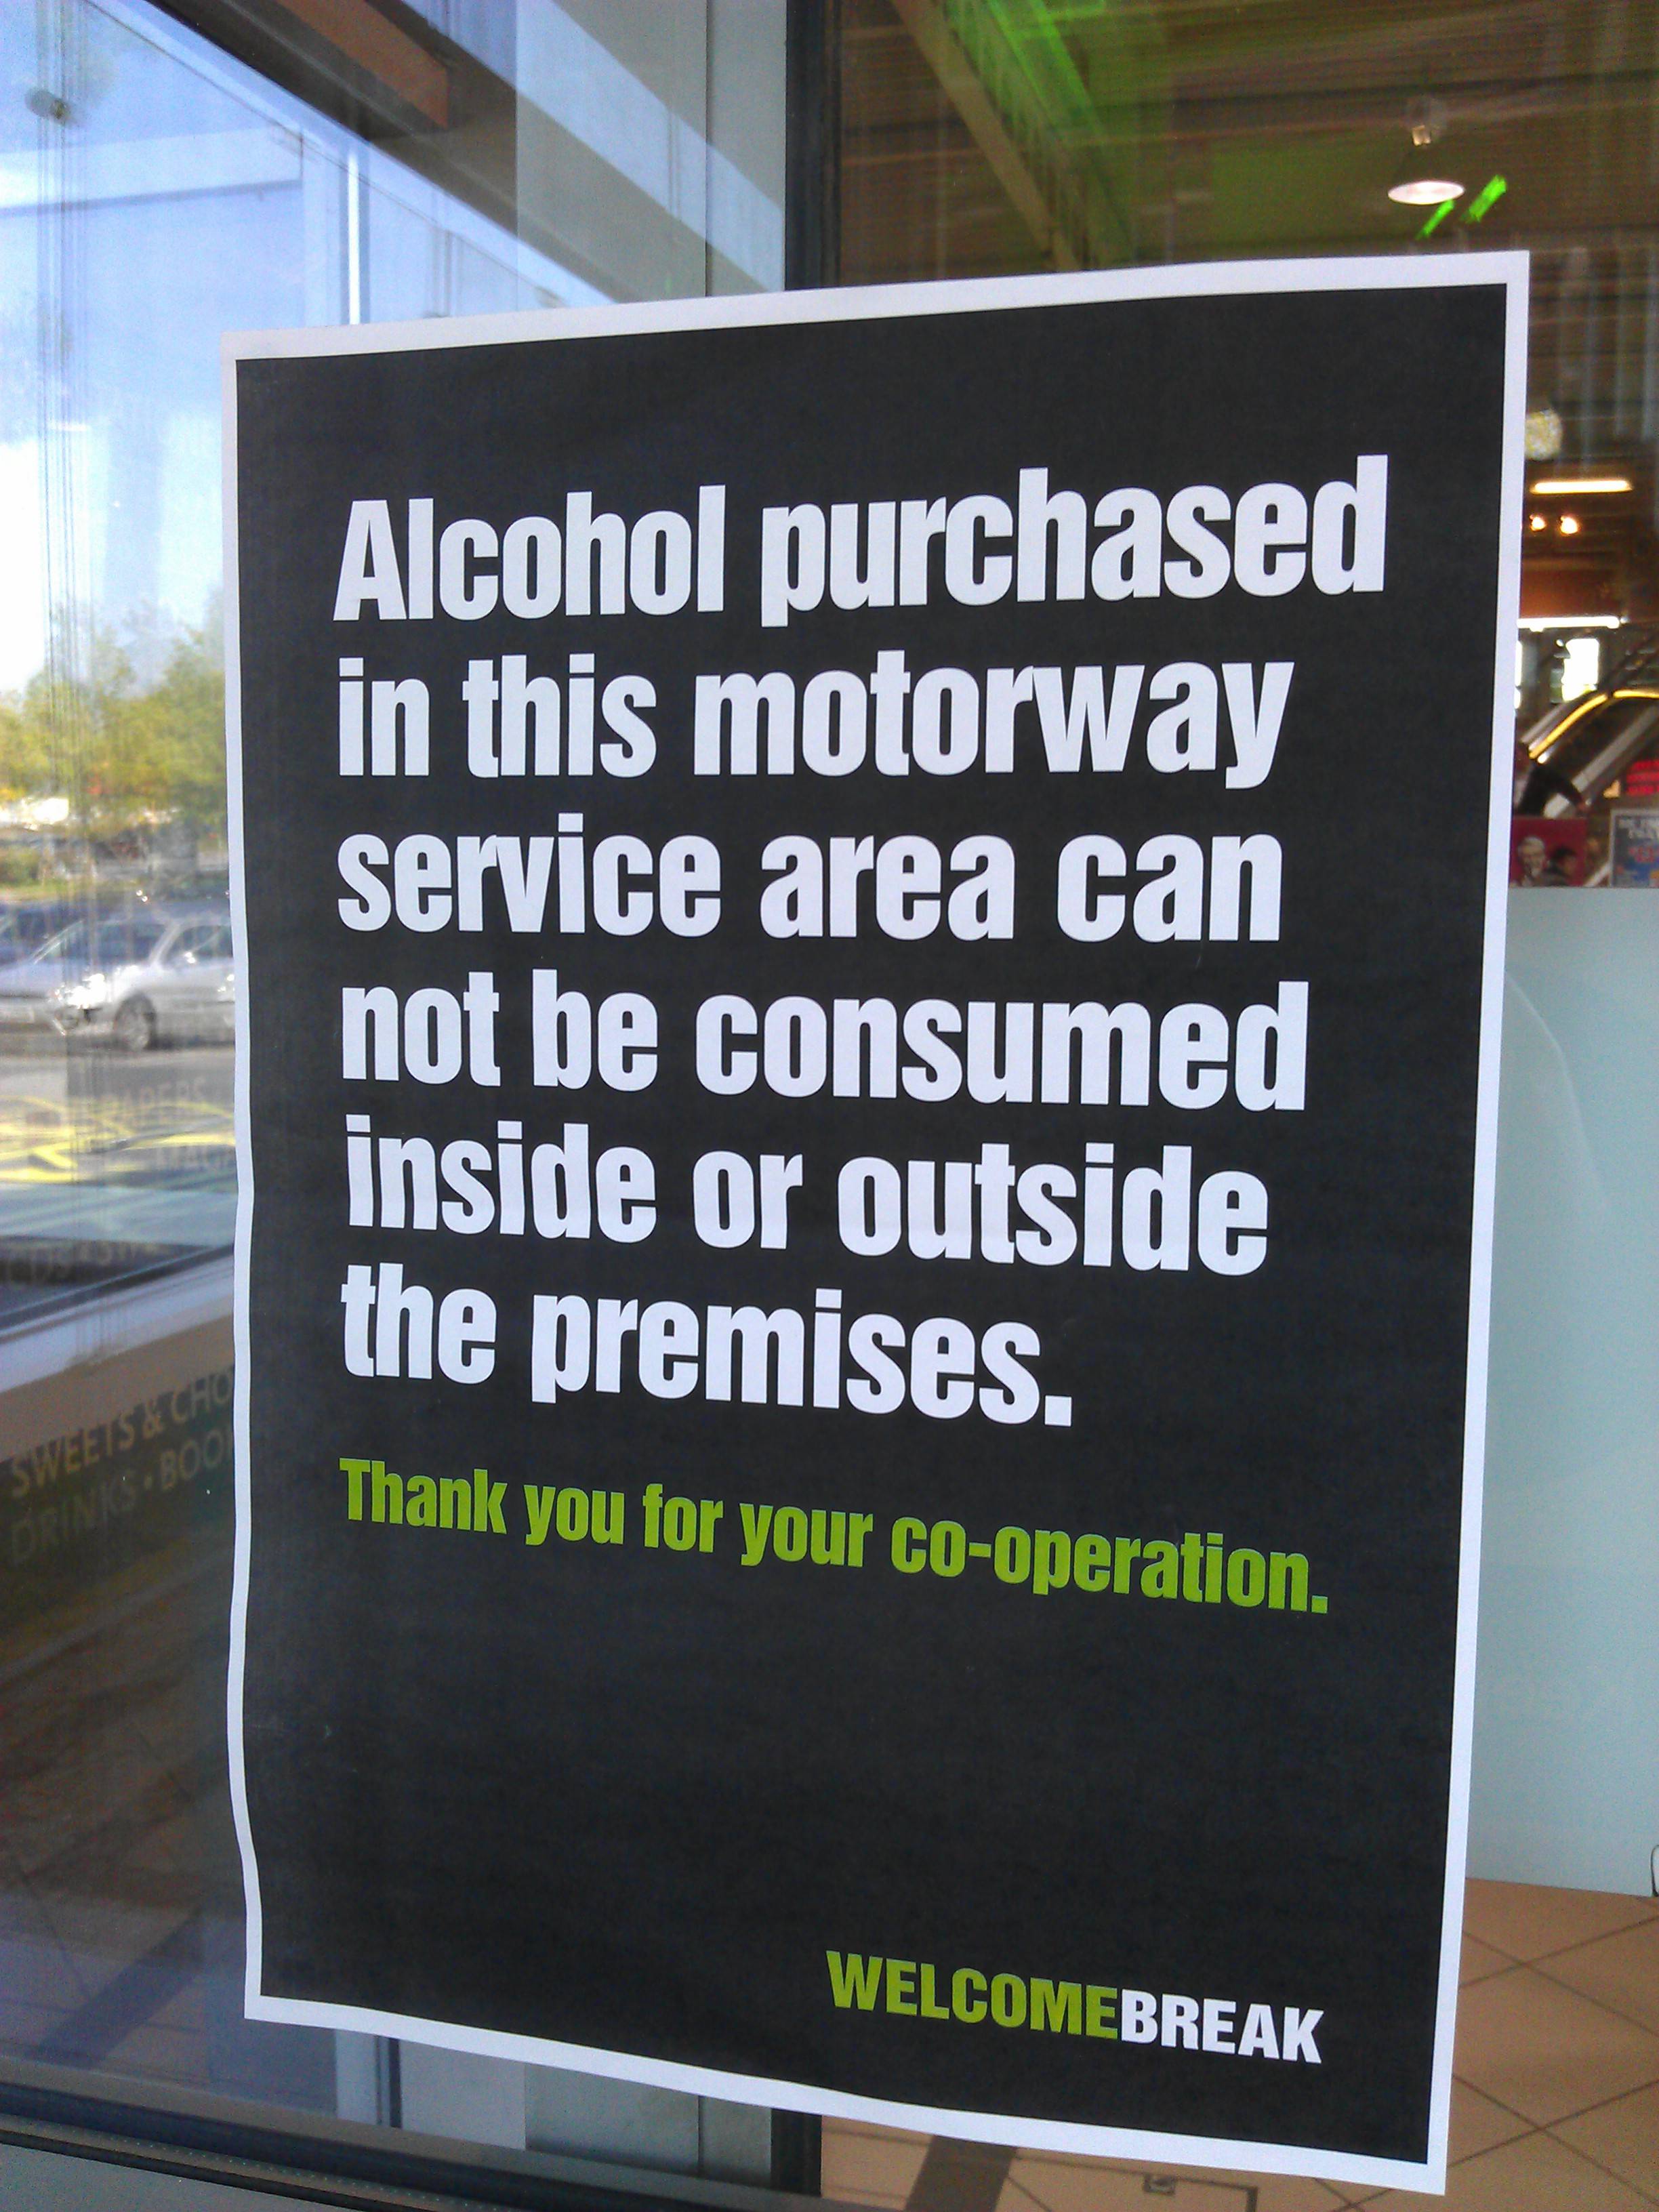 Alcohol purchased in this motorway service area can not be consumed inside or outside the premises.